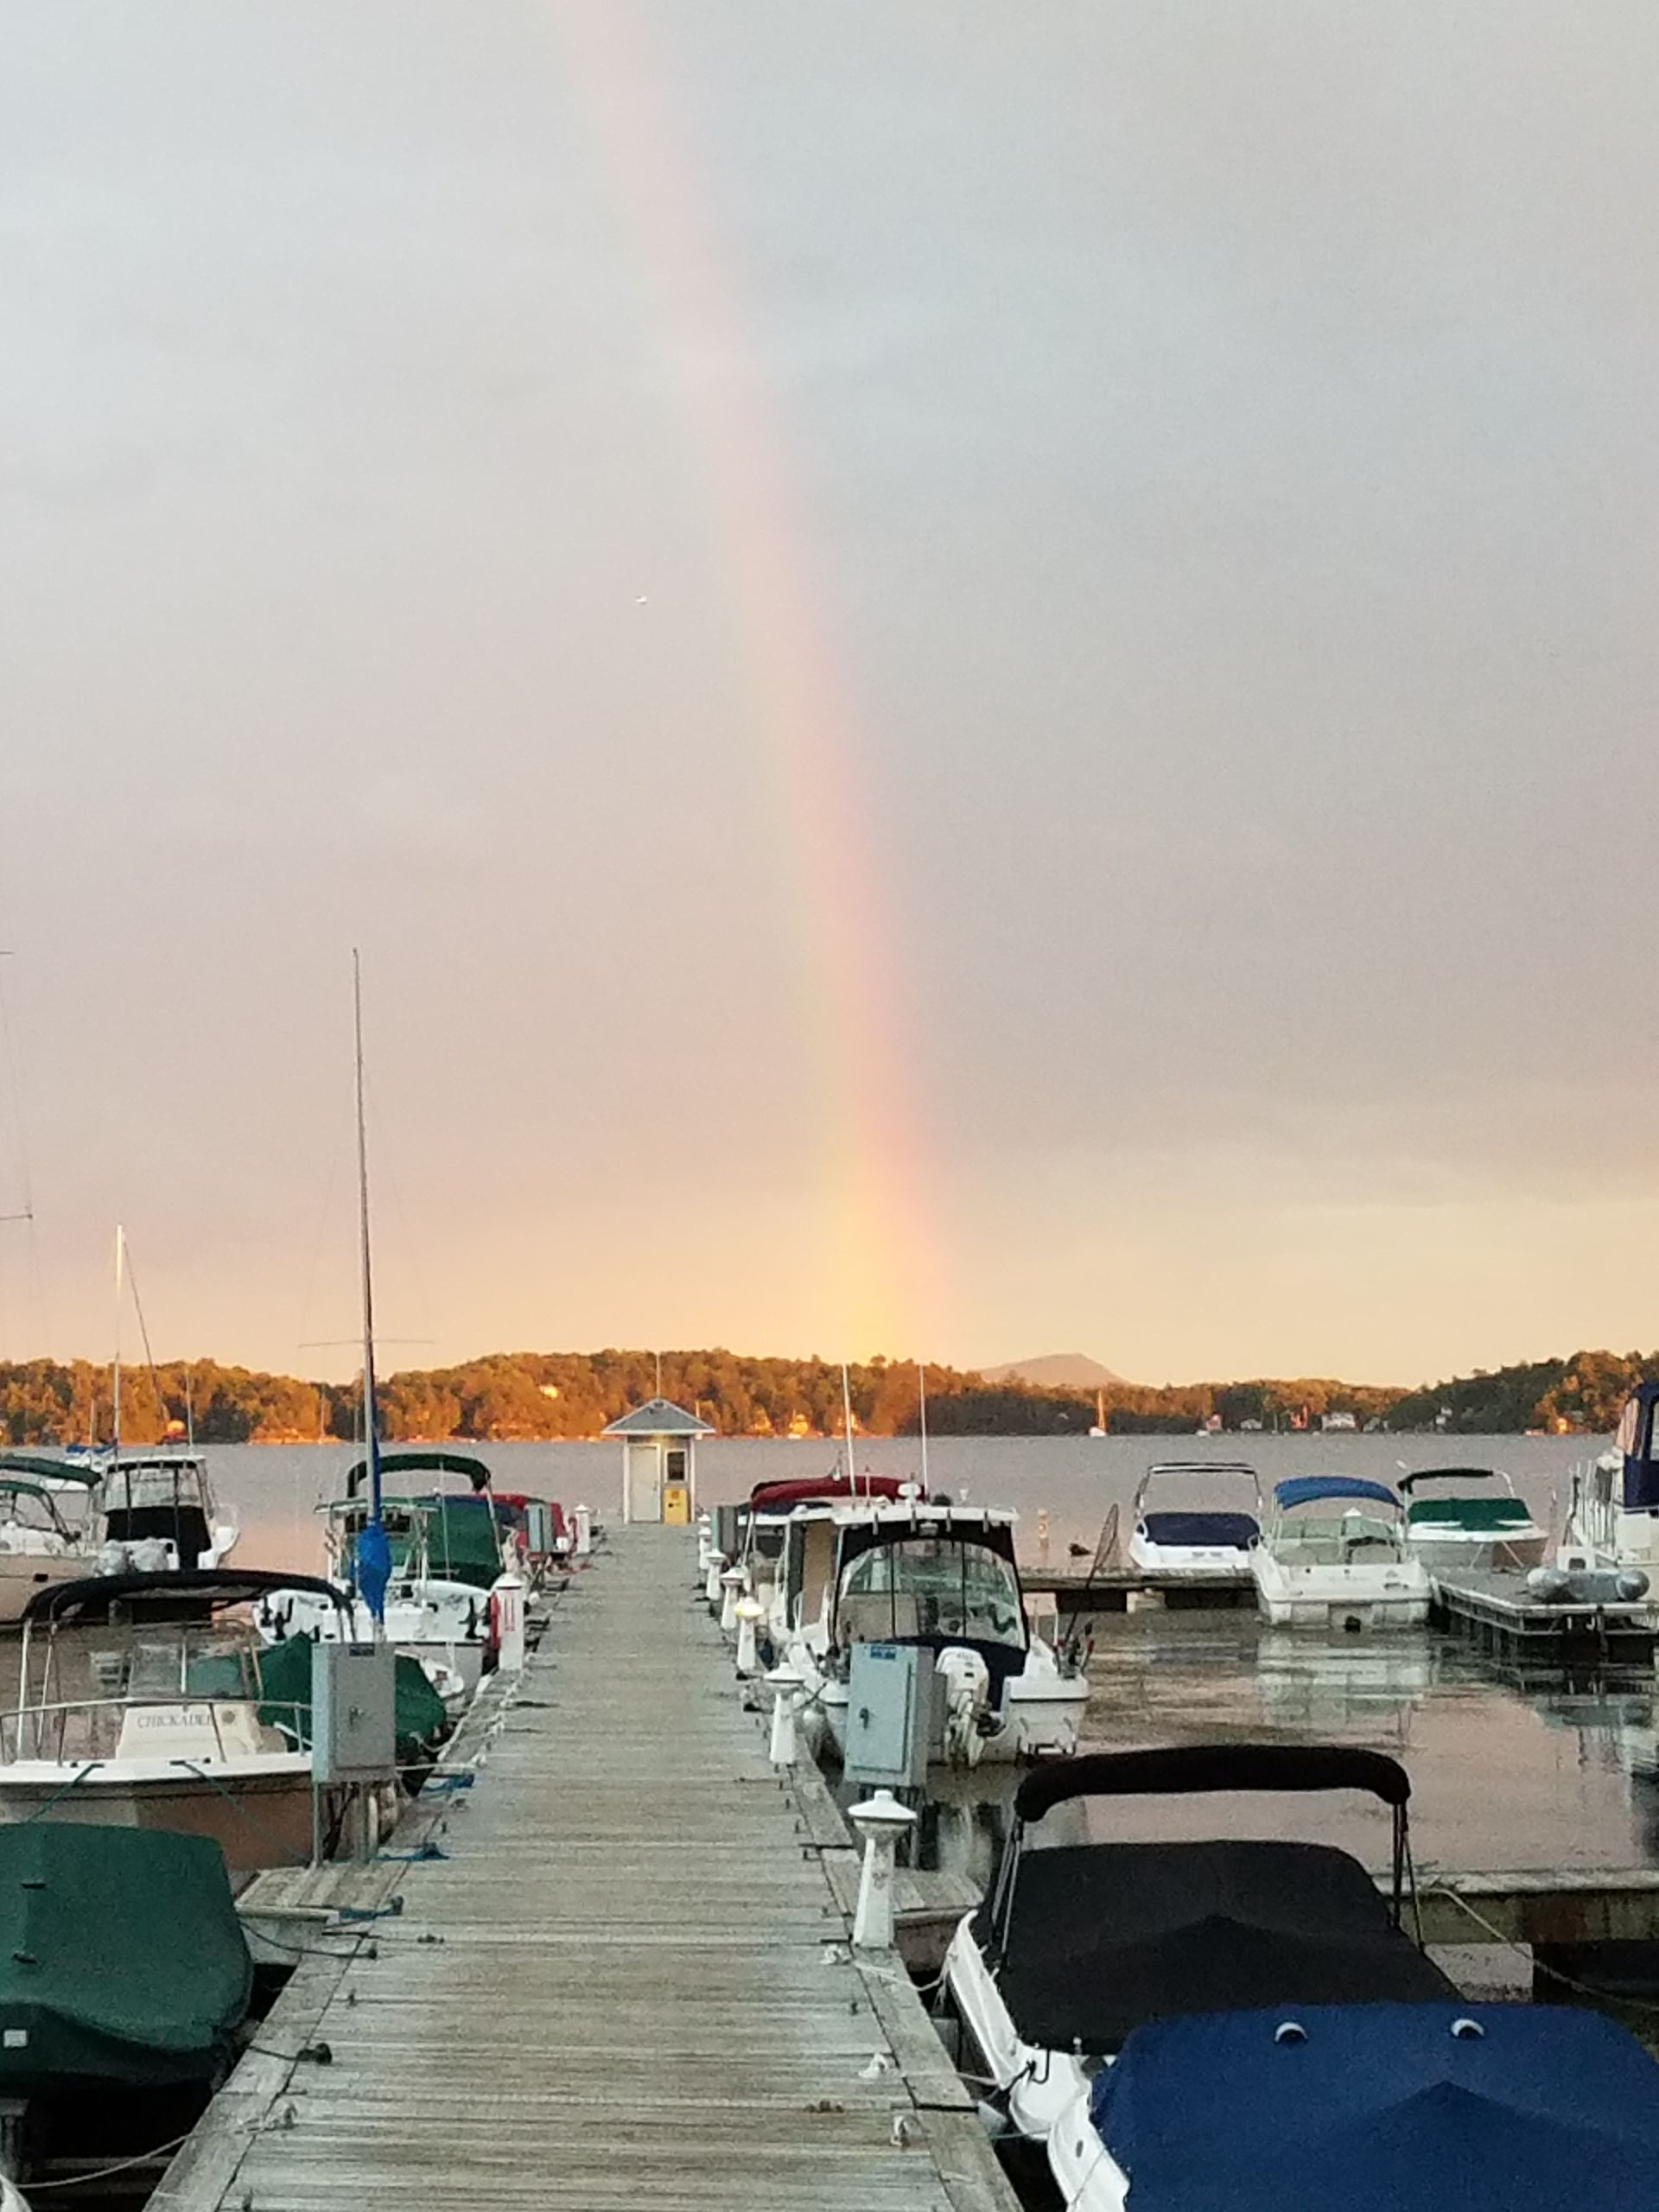 A dock filled with boats and a rainbow in the sky